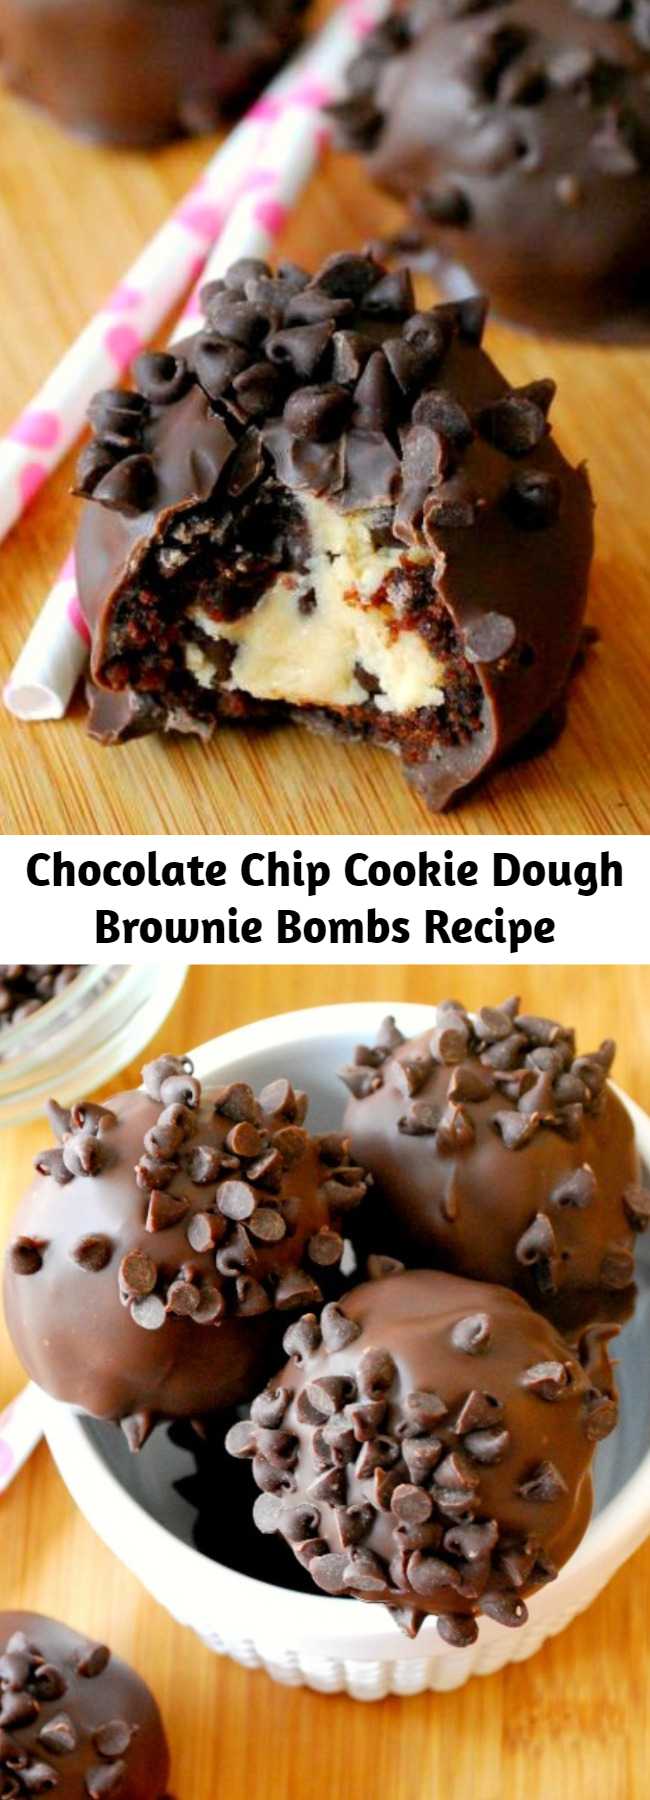 Chocolate Chip Cookie Dough Brownie Bombs Recipe - Eggless chocolate chip cookie dough is wrapped in a fudgy baked brownie, then coated in chocolate and sprinkled with chocolate chips! Positively DIVINE! #browniebombs #brownie #cookiedough